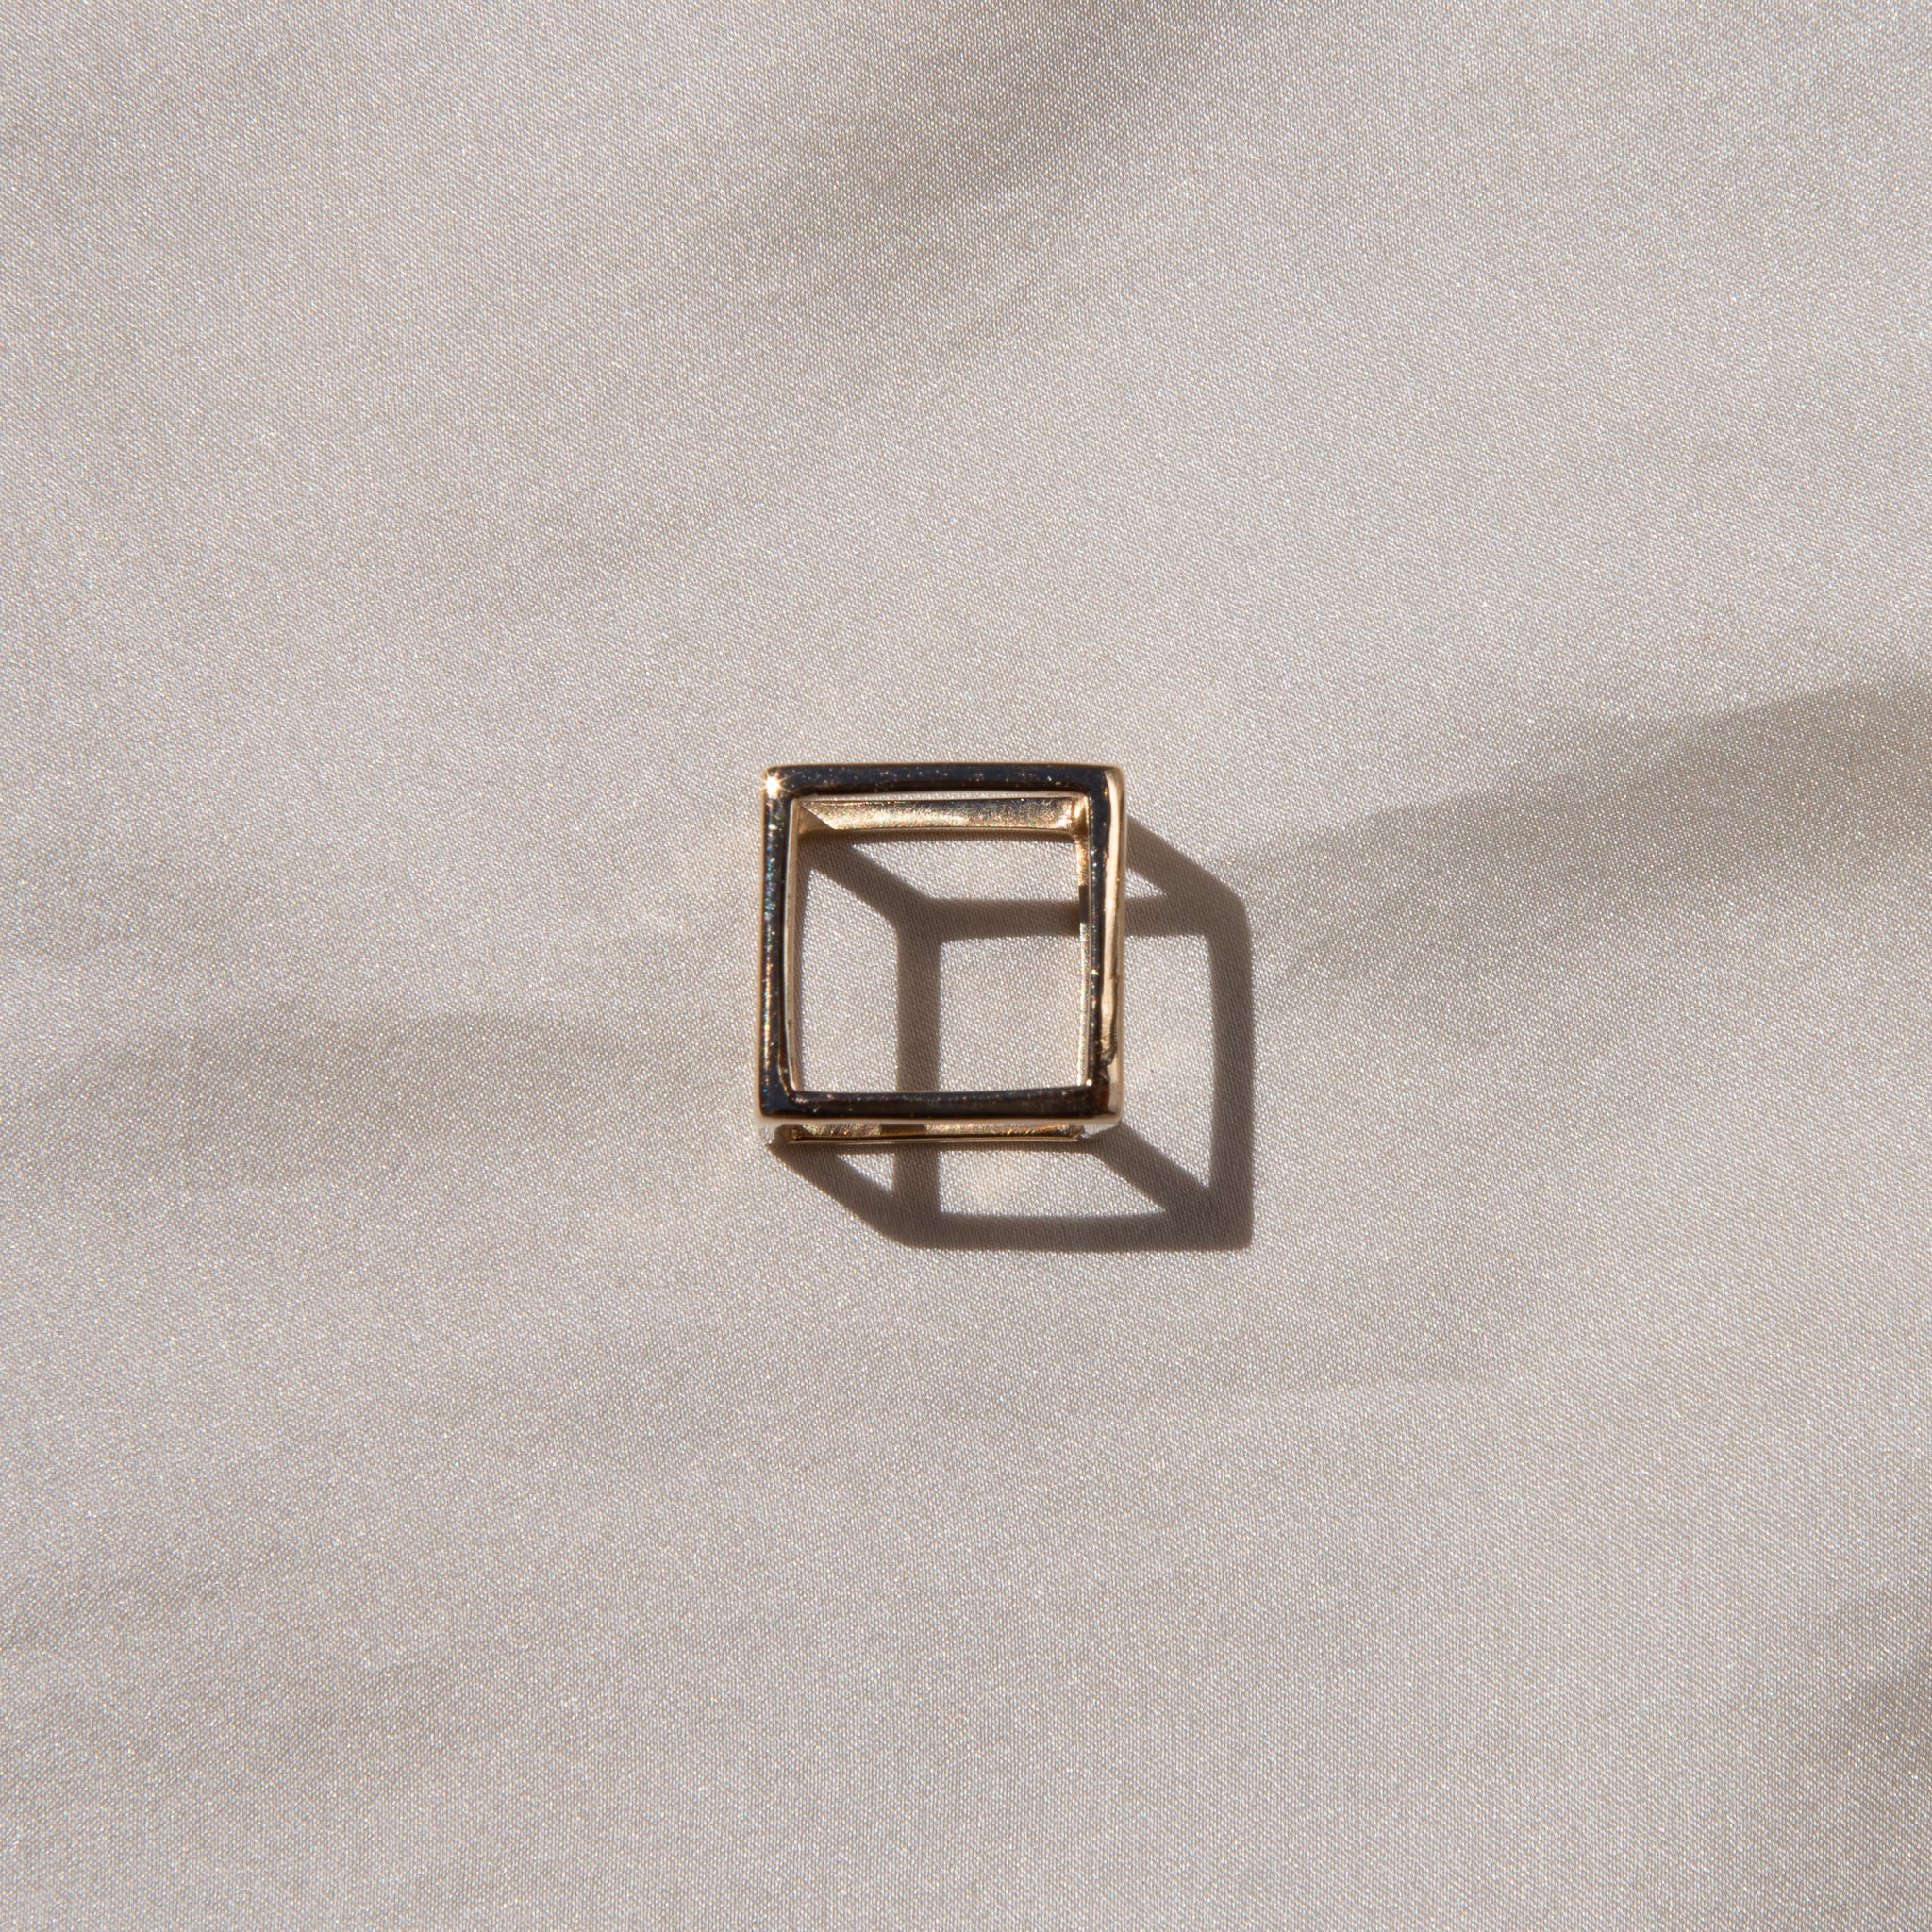 Hexahedron Cube Gold Ring | Pendant